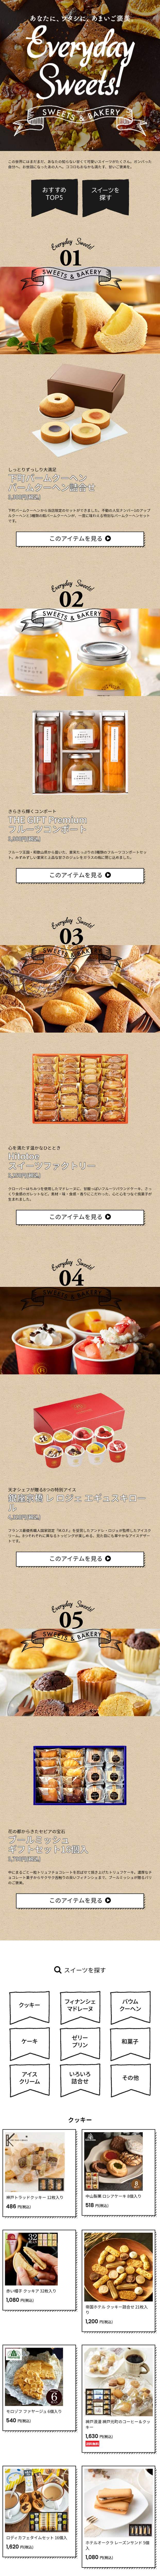 Everyday Sweets!_sp_1